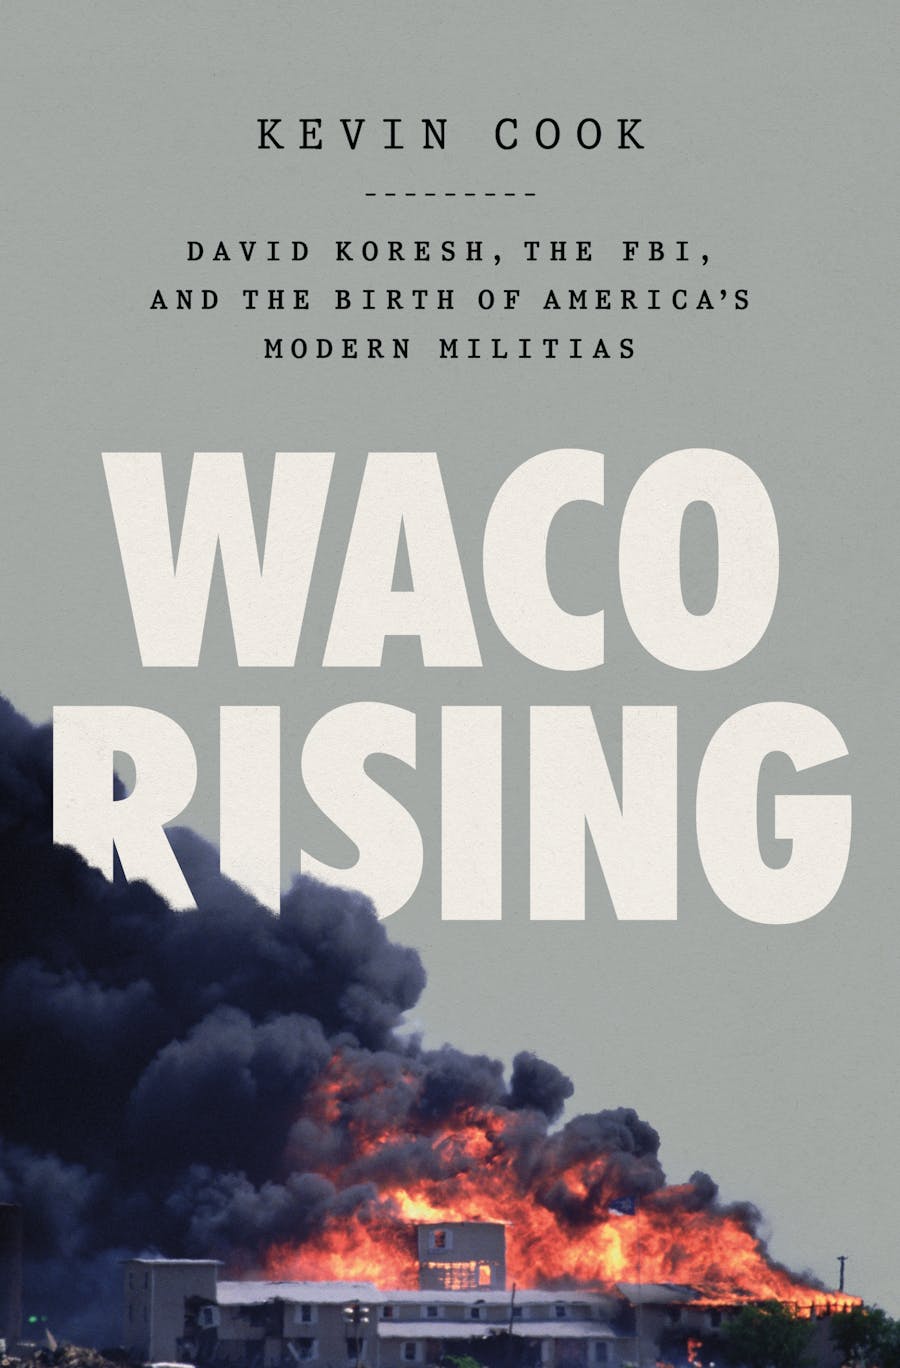 WACO RISING by Kevin Cook